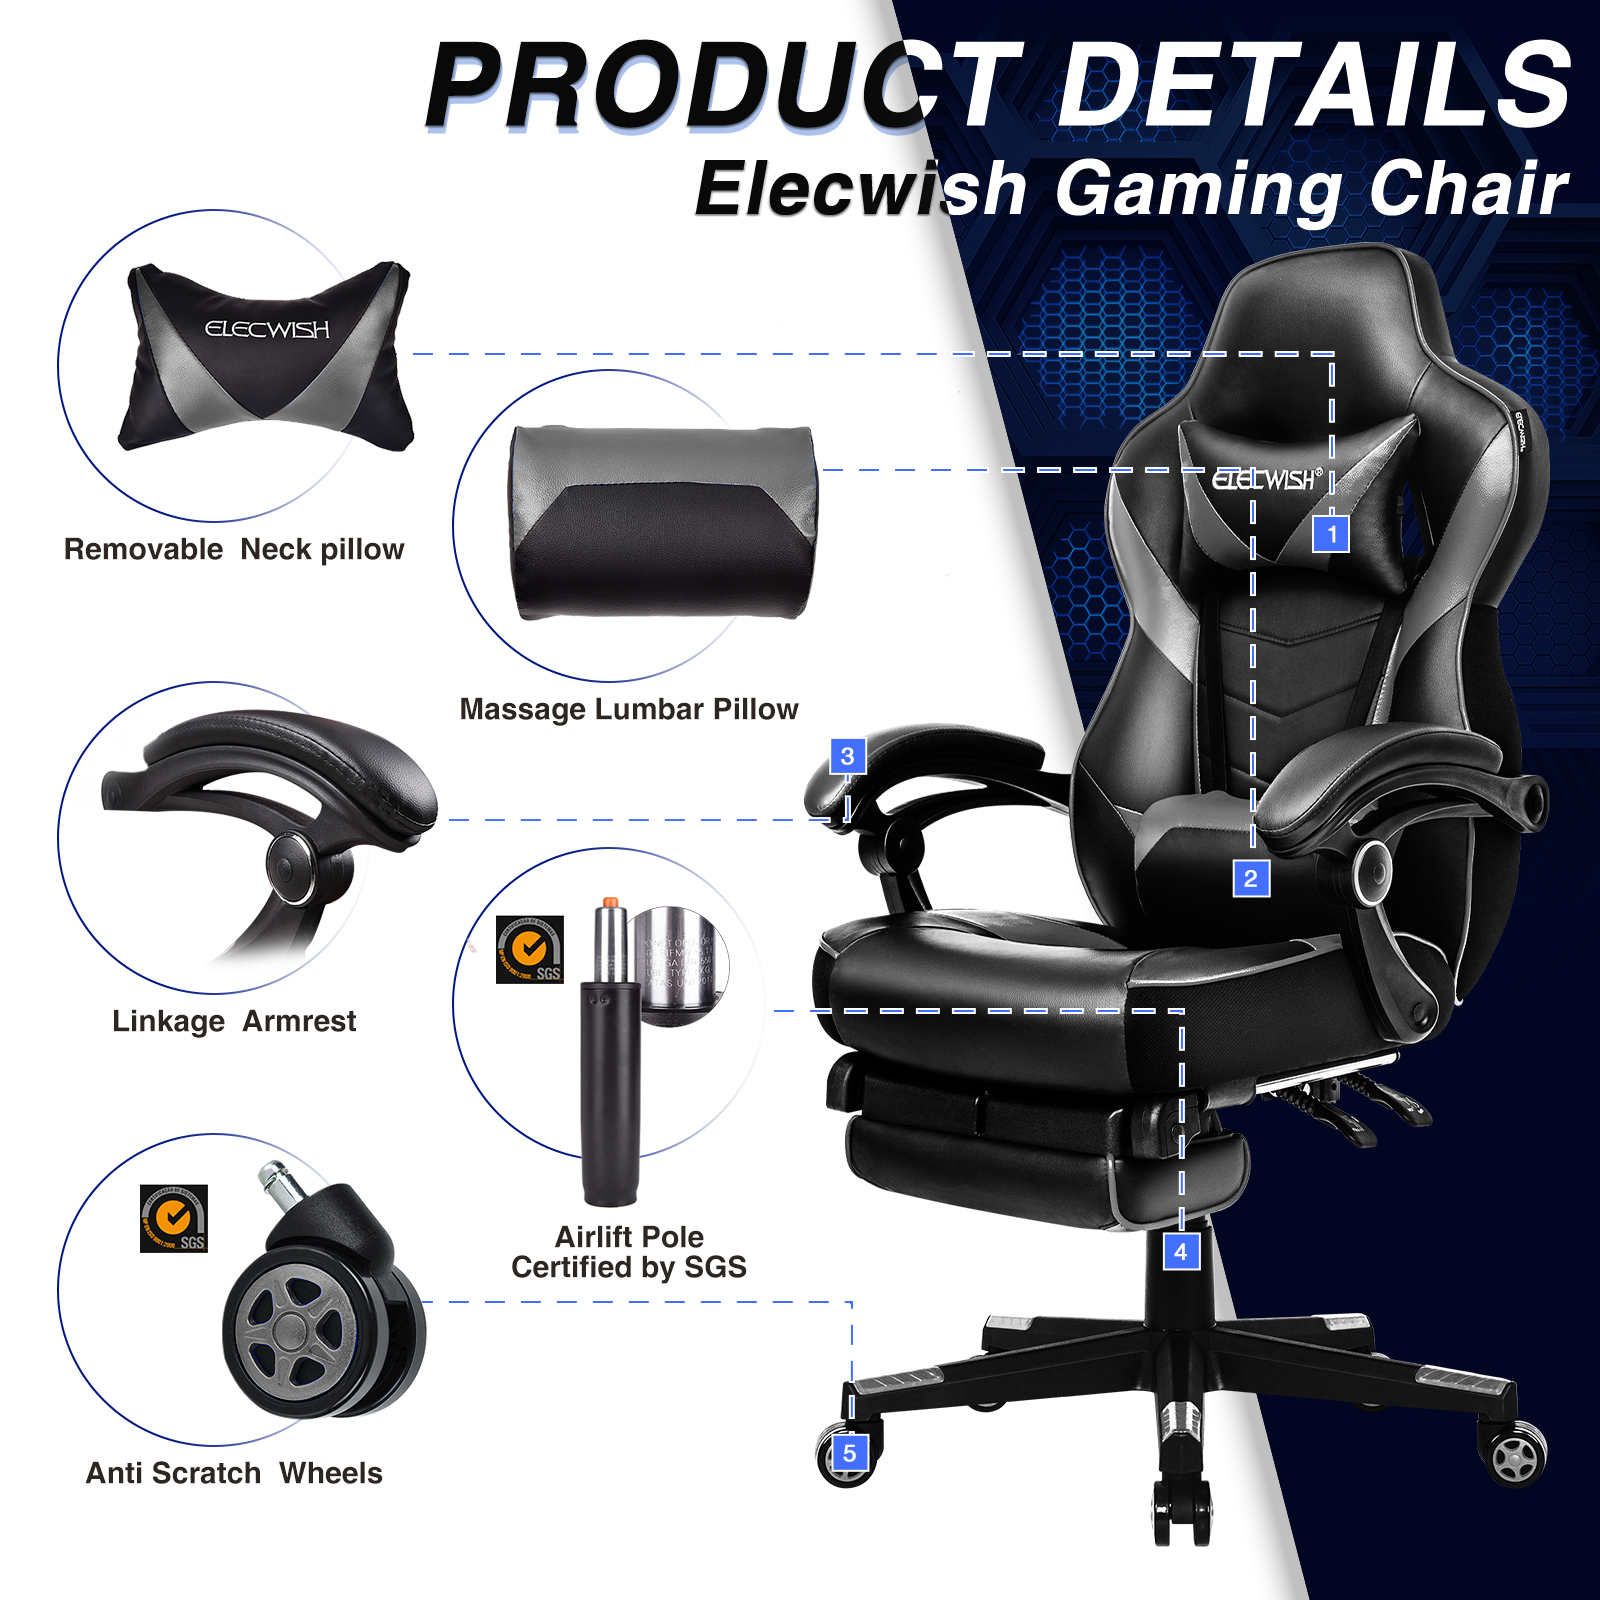 Elecwish Gaming Chair with Thick Foam Padding, Gray / Classic